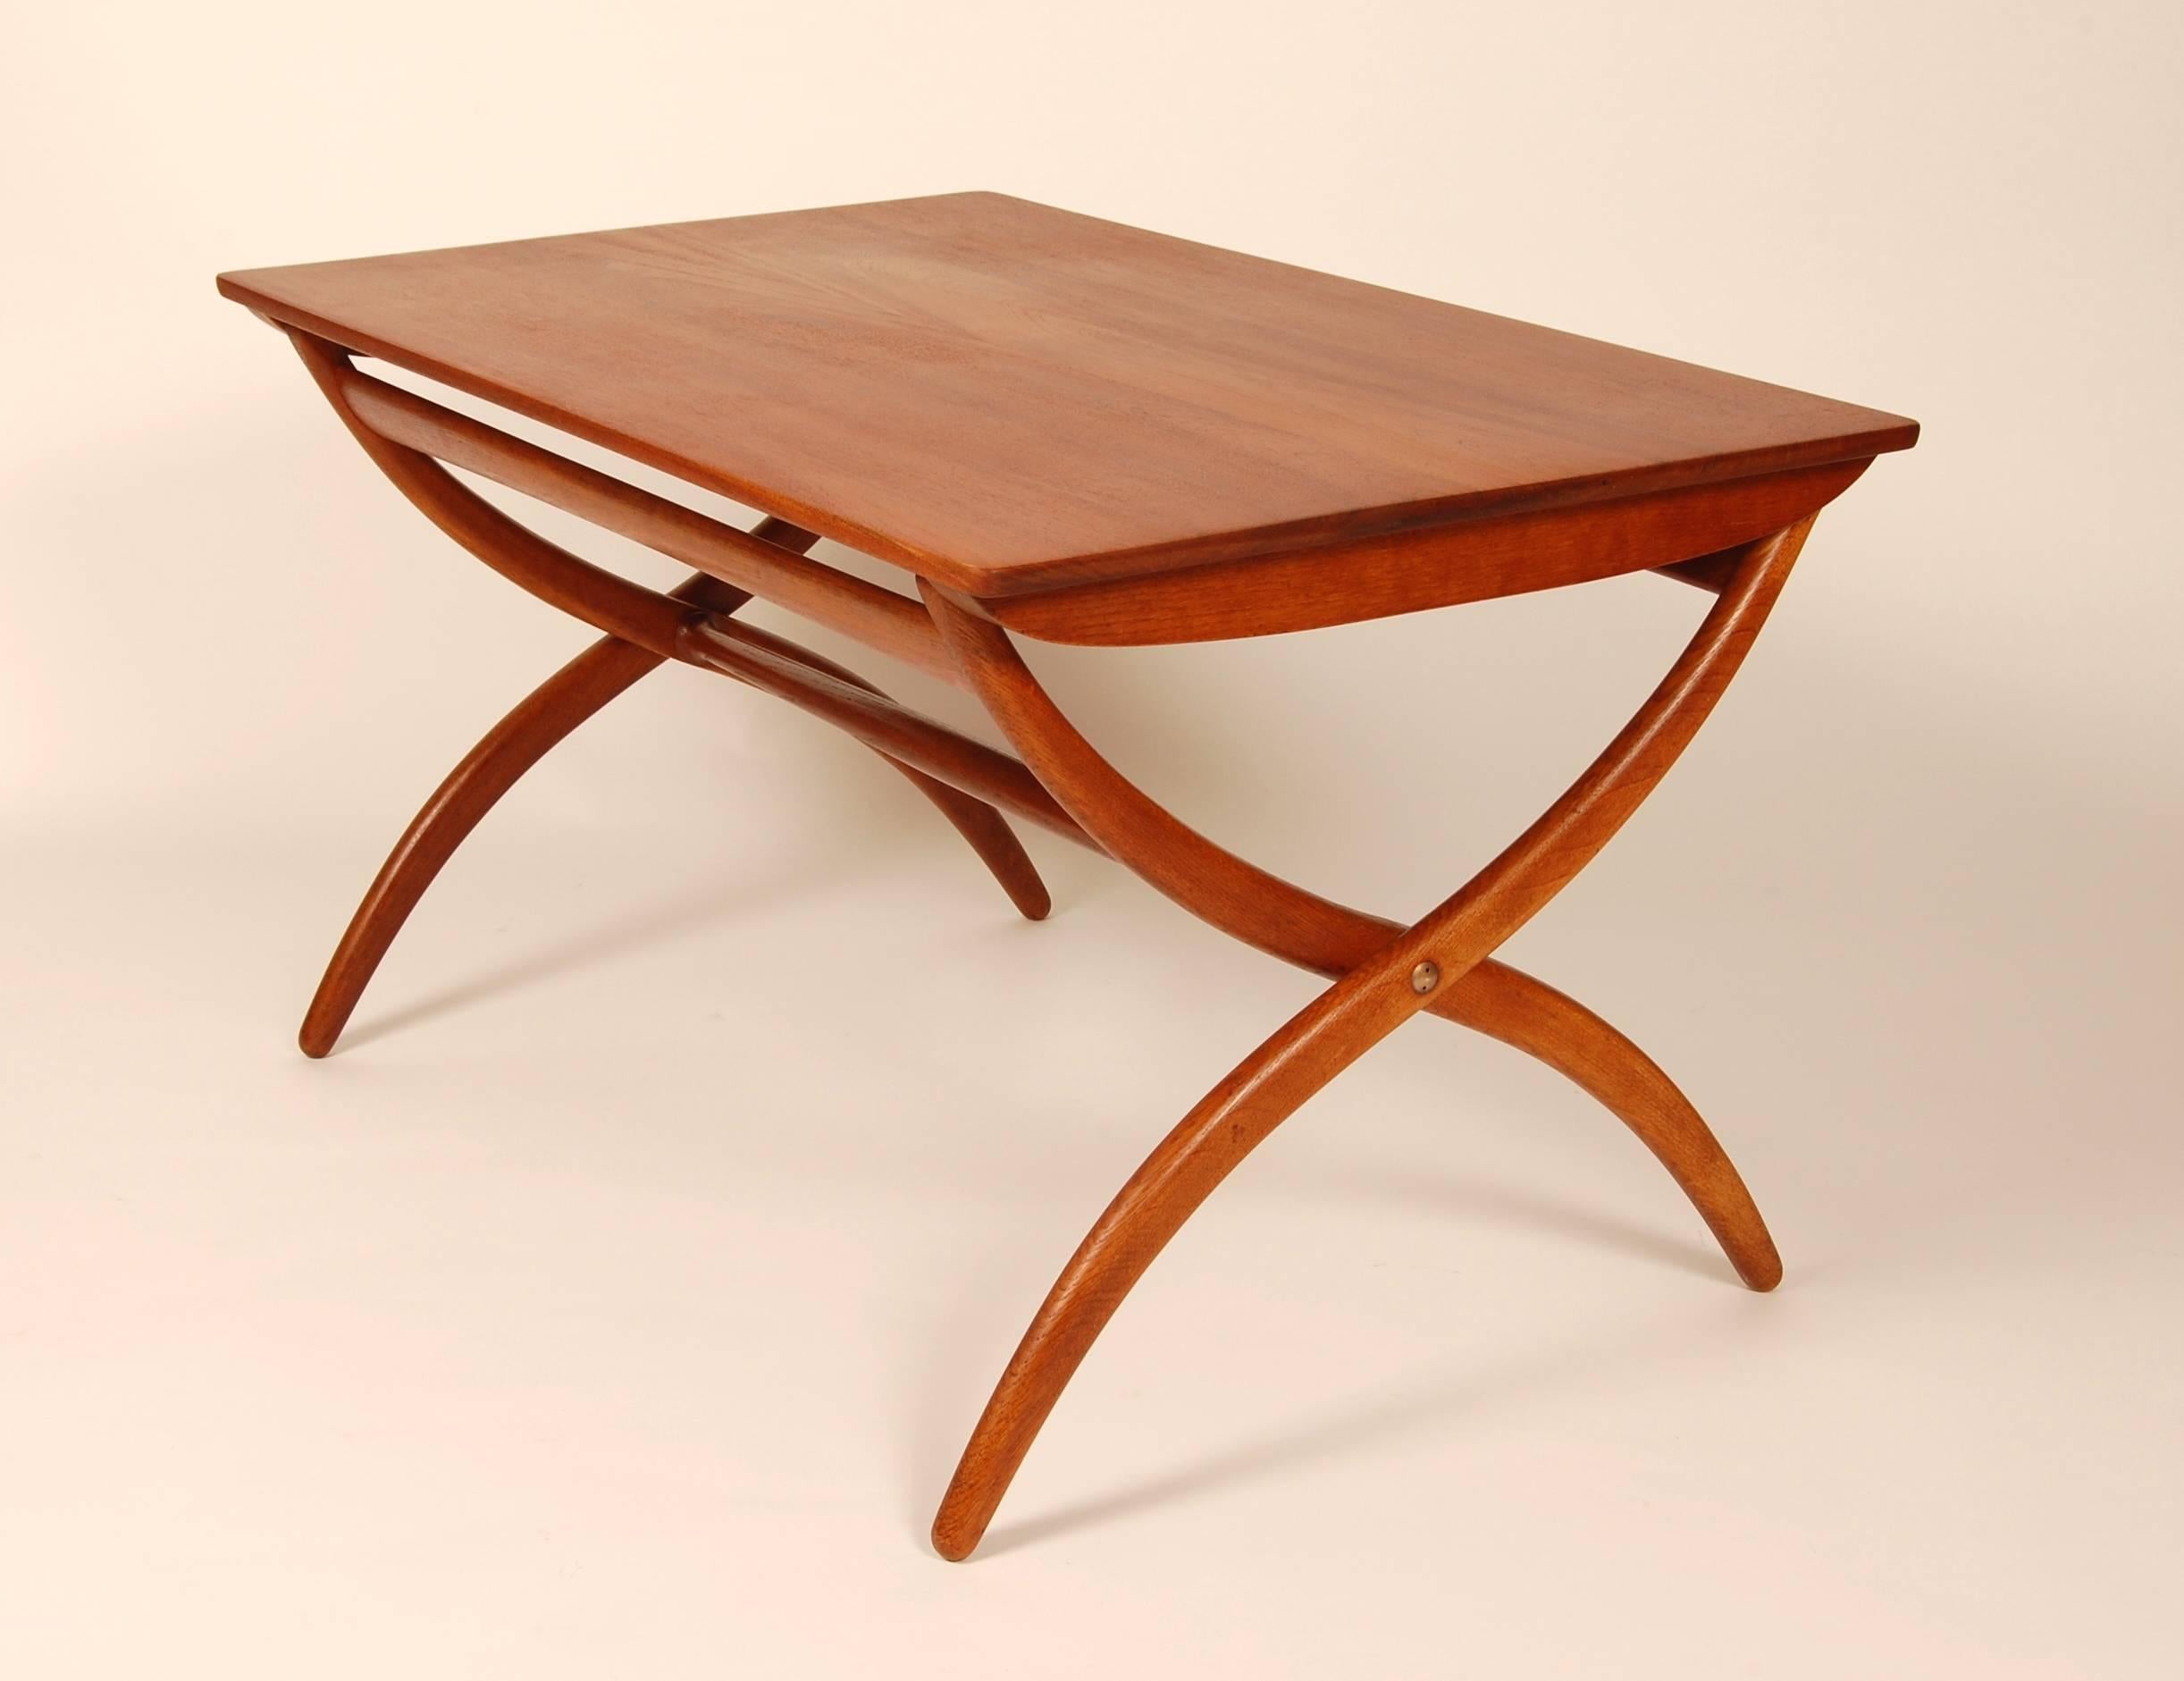 Adjustable coffee table designed by Ole Wanscher and crafted by Rud. Rasmussen Snedkerier circa 1951. Oil and wax finish solid teak top with oak legs and brass hardware. The table can adjust from 23